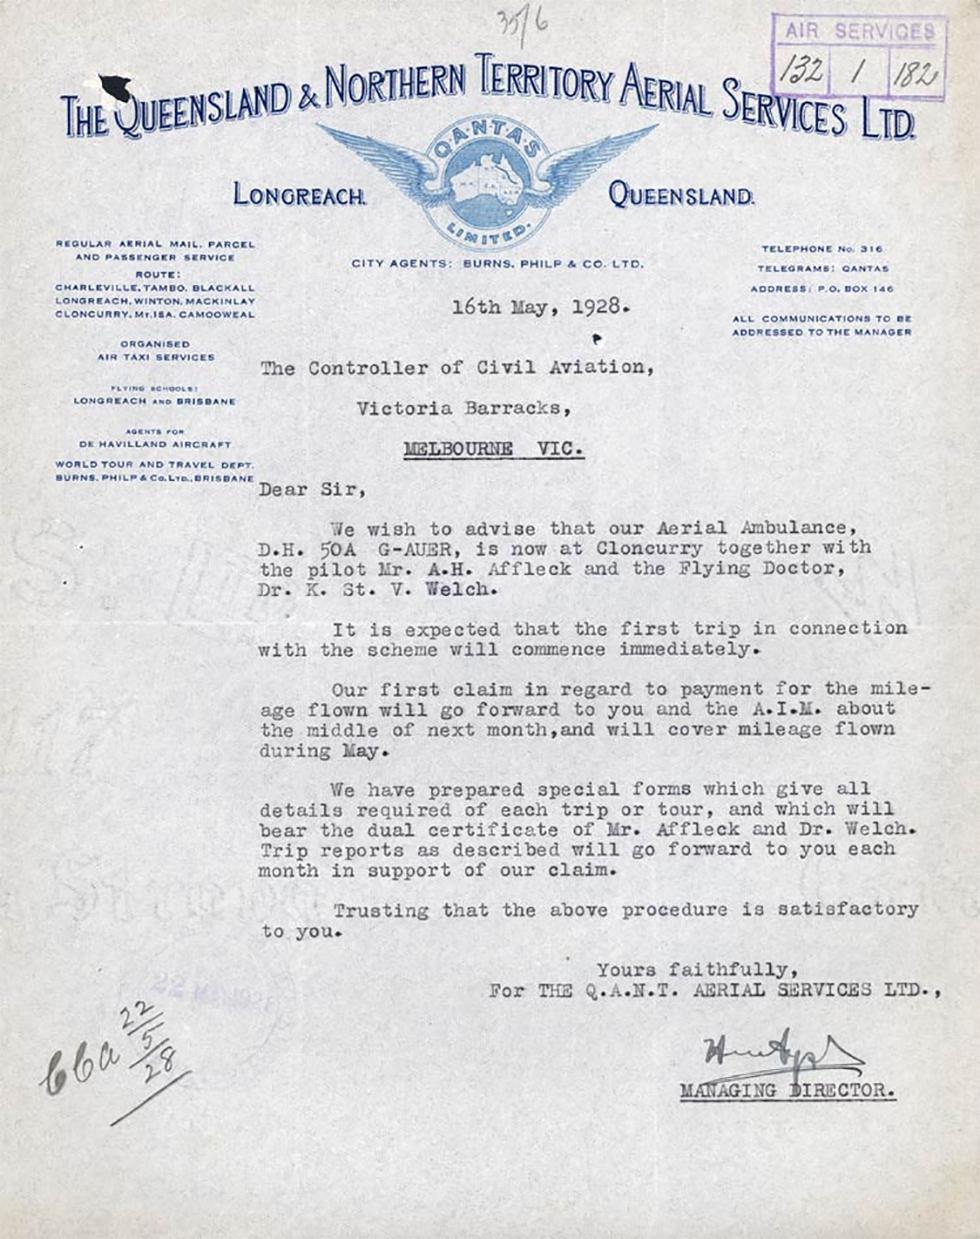 Letter to the controller of Civil Aviation, Victoria Barracks, regarding the first flying doctor trip.